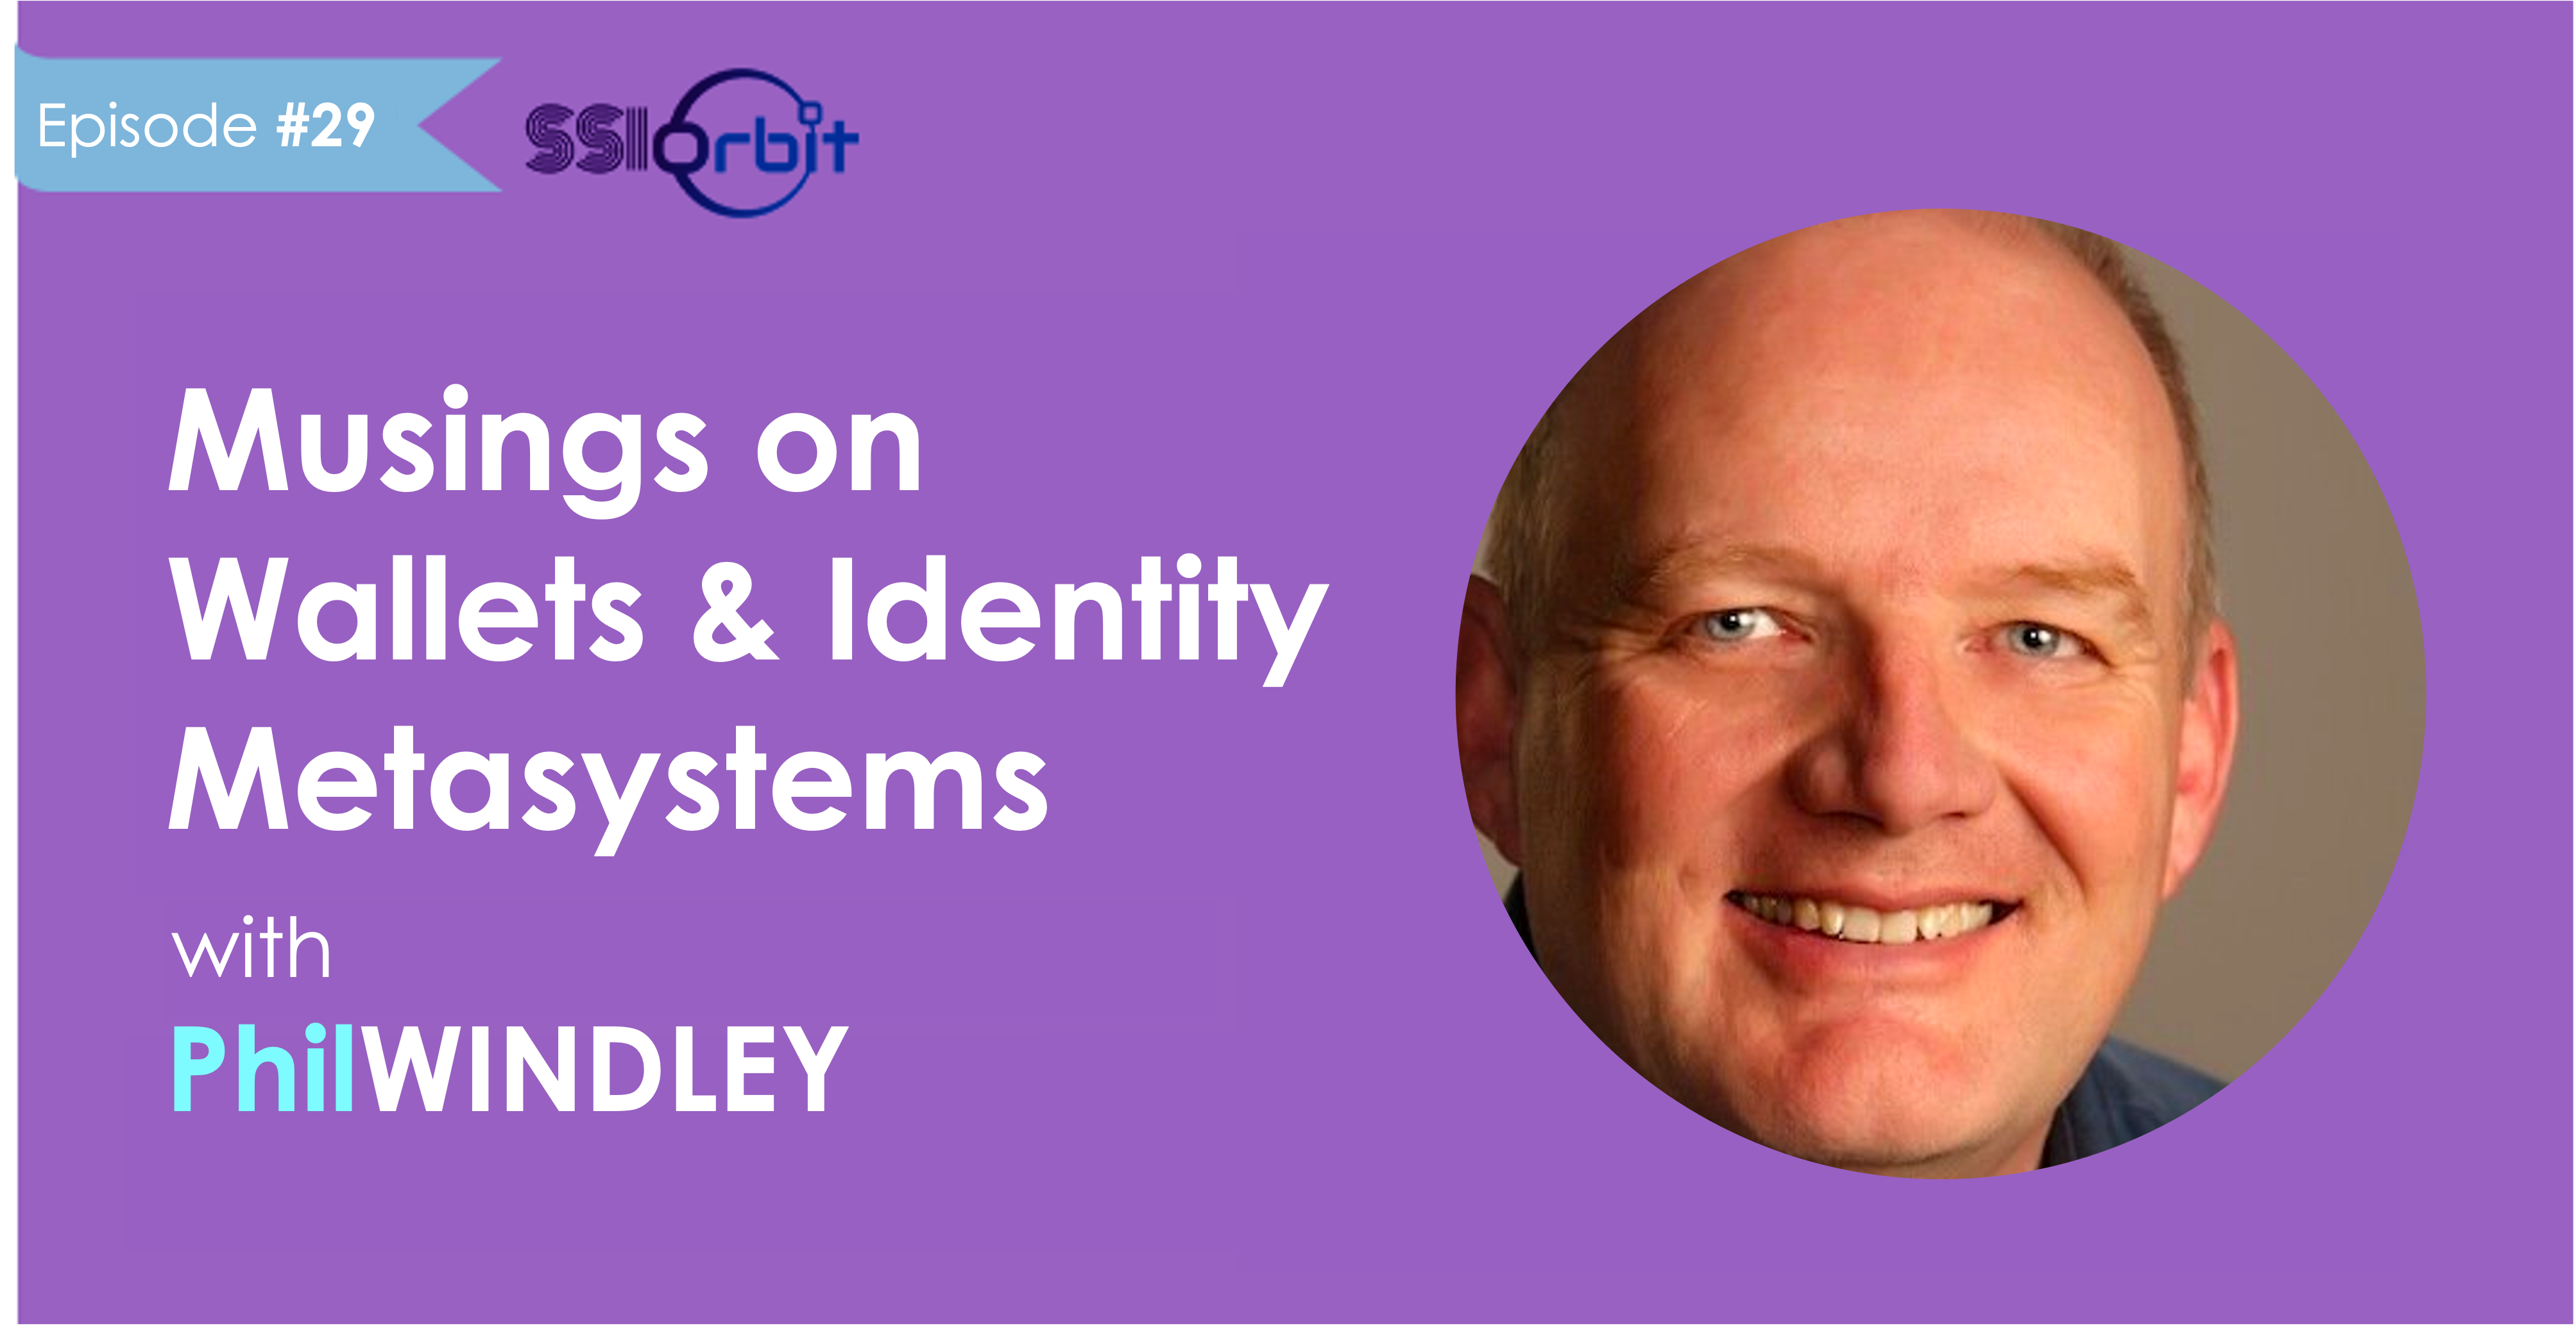 Musings on Wallets & Identity Metasystems (with Phil Windley)